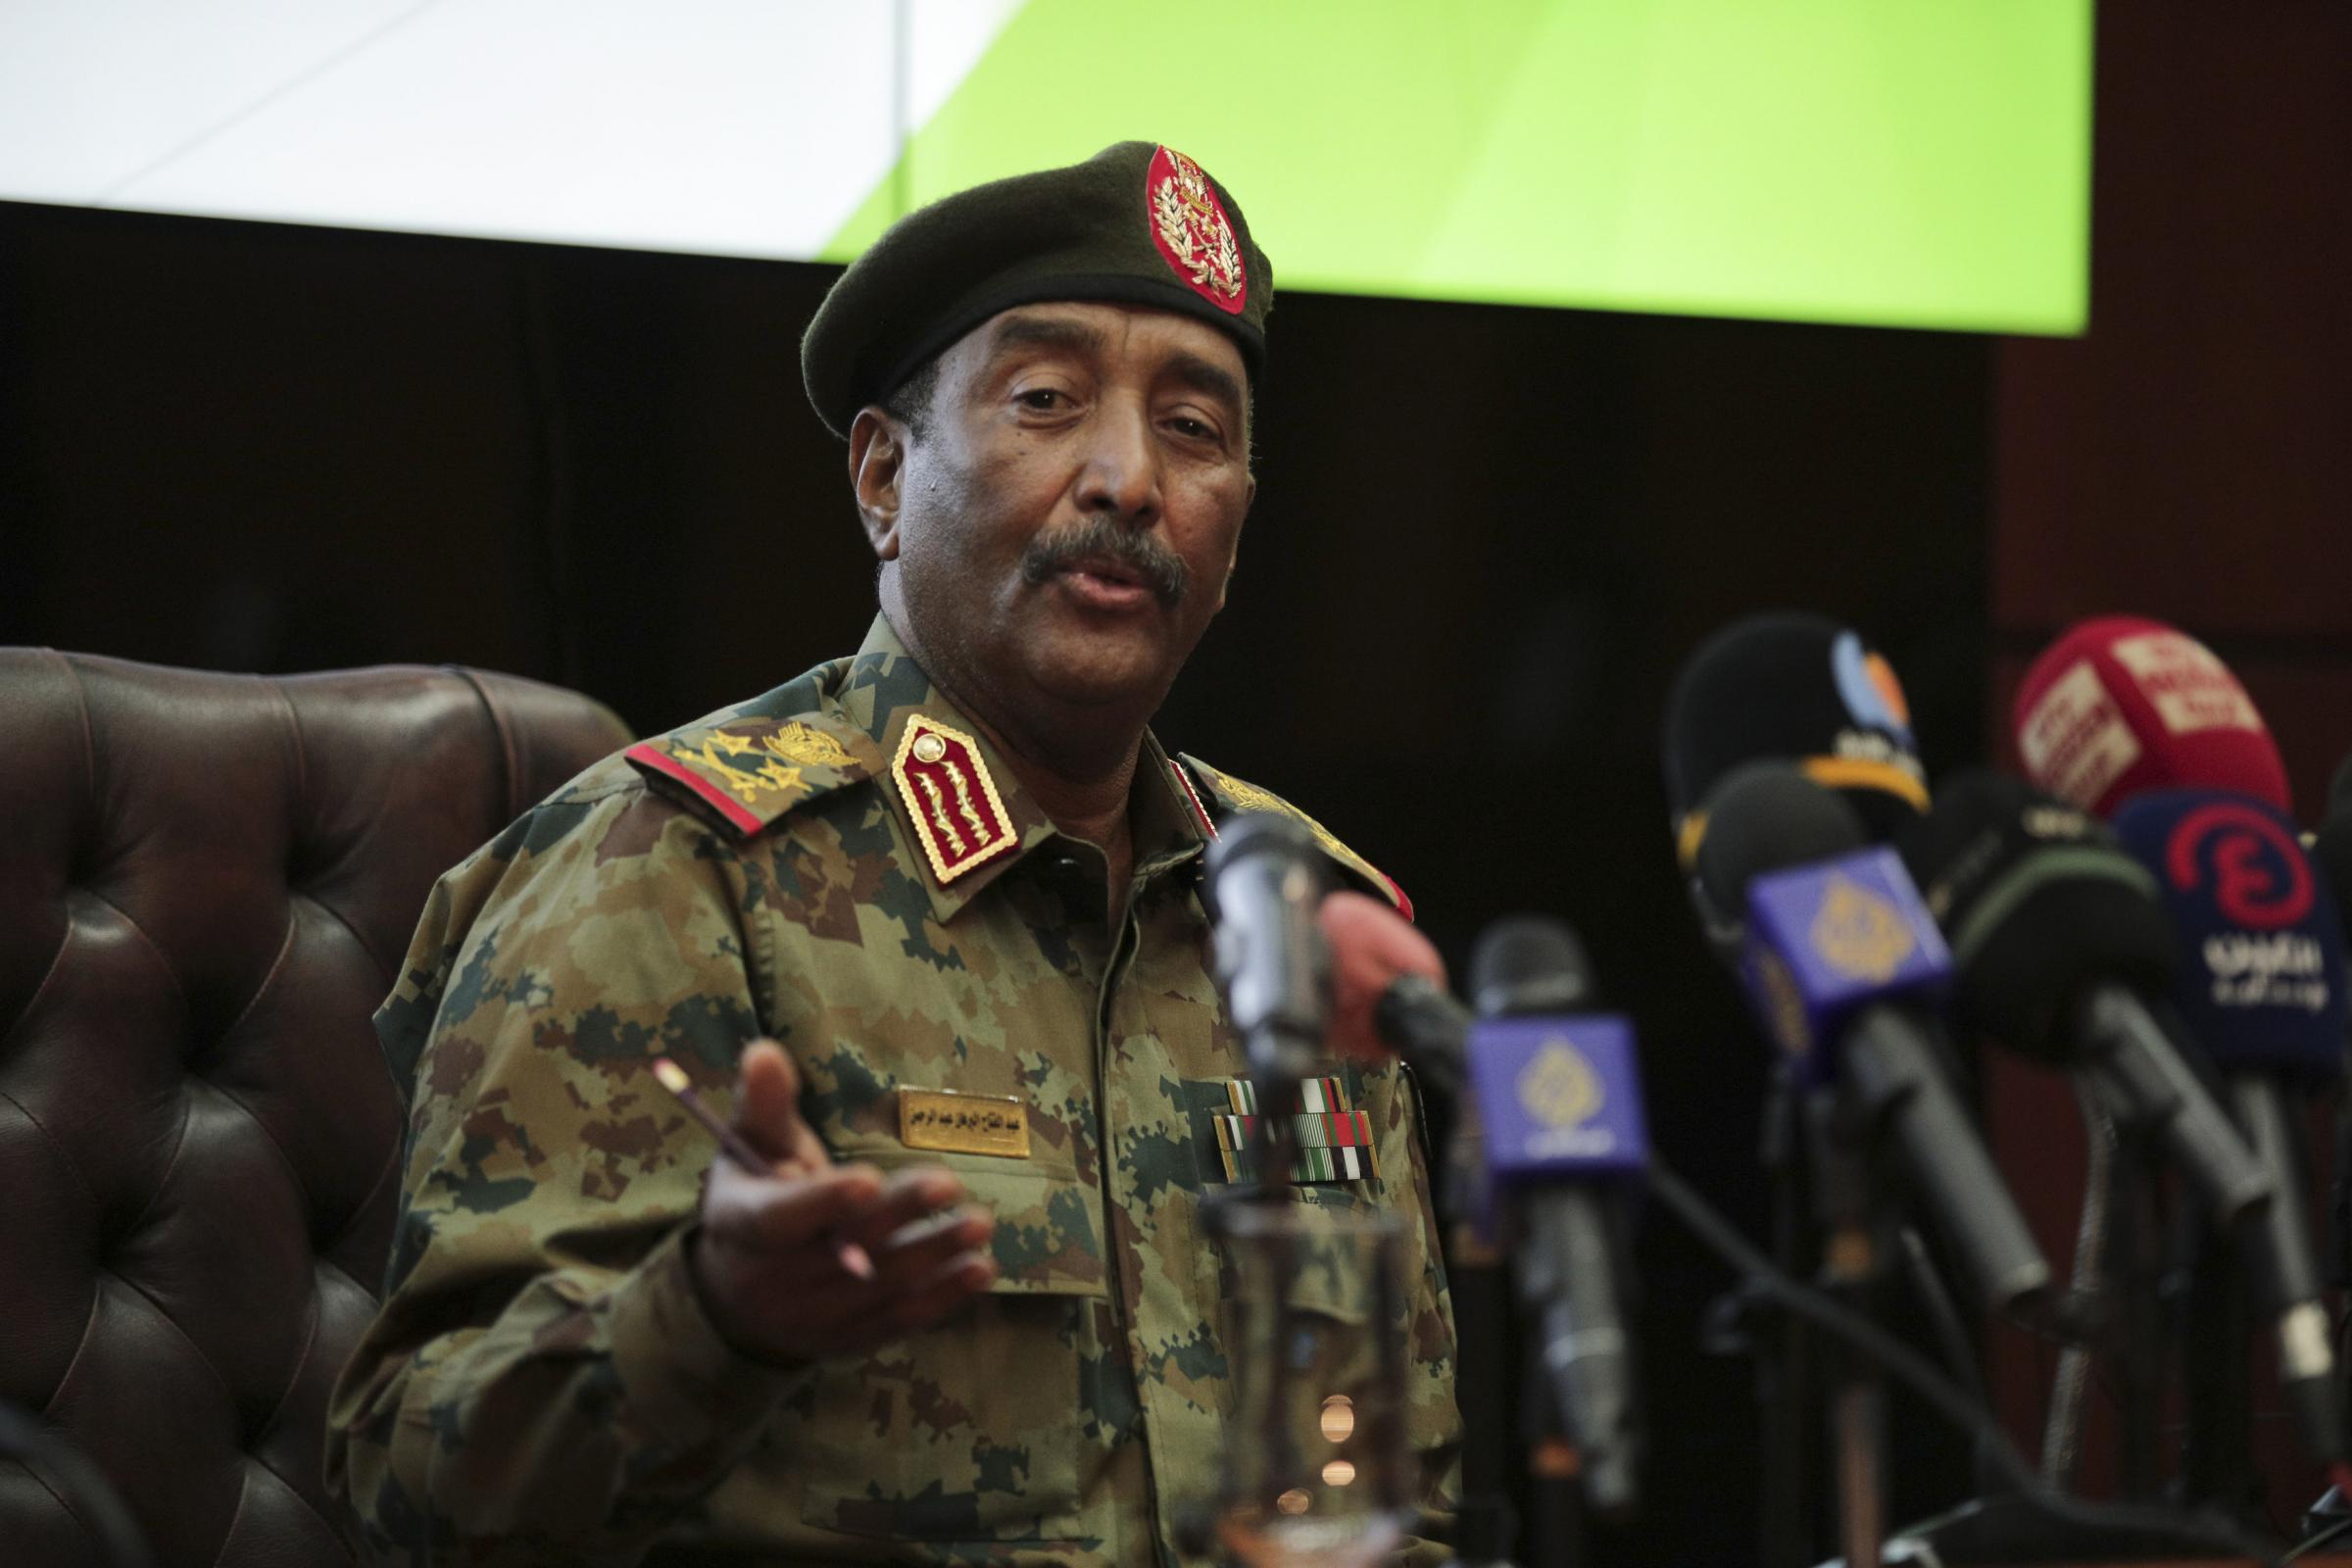 Sudans head of the military, Gen. Abdel-Fattah Burhan,peaks during a press conference at the General Command of the Armed Forces in Khartoum, Sudan, Tuesday, Oct. 26, 2021. Burhan said that some members of the government he dissolved in a coup could